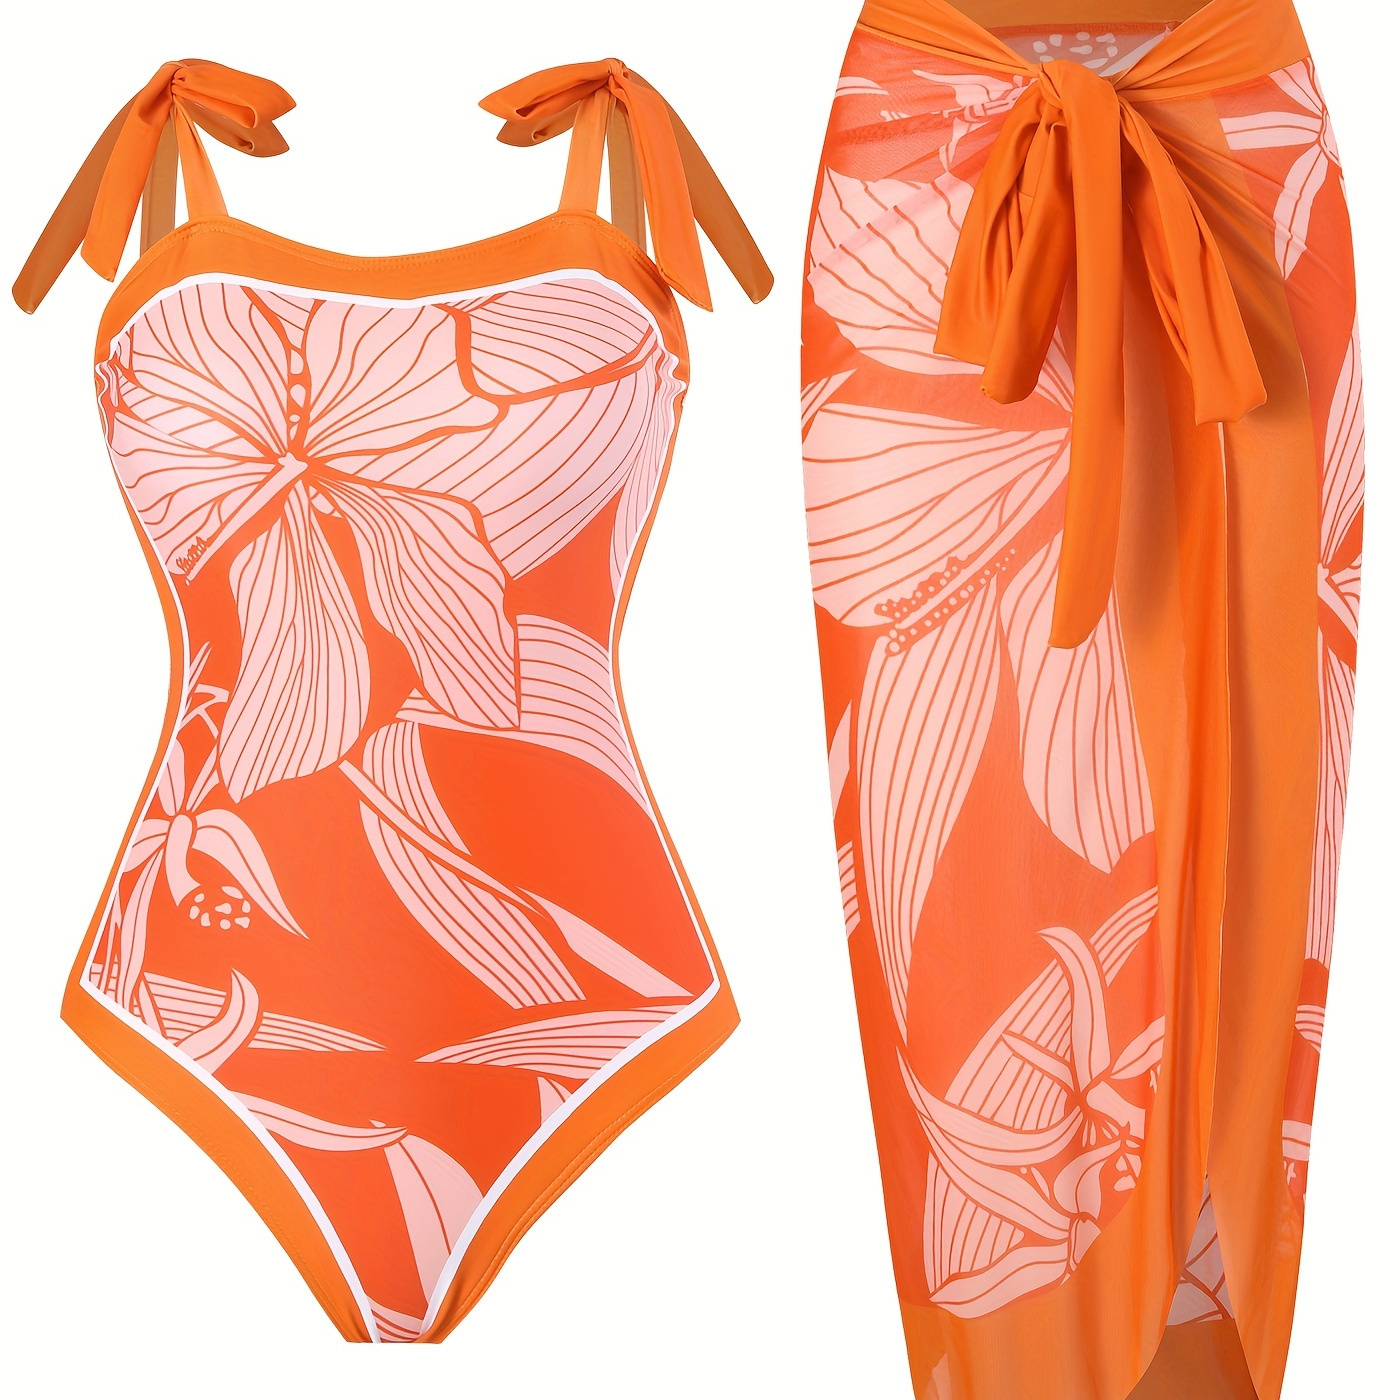 

Tangerine Red Floral Print Elegant Stretchy 2 Piece Swimsuits, Tie Shoulder One-piece Bathing-suit & Cover Up Skirt, Women's Swimwear & Clothing For Holiday